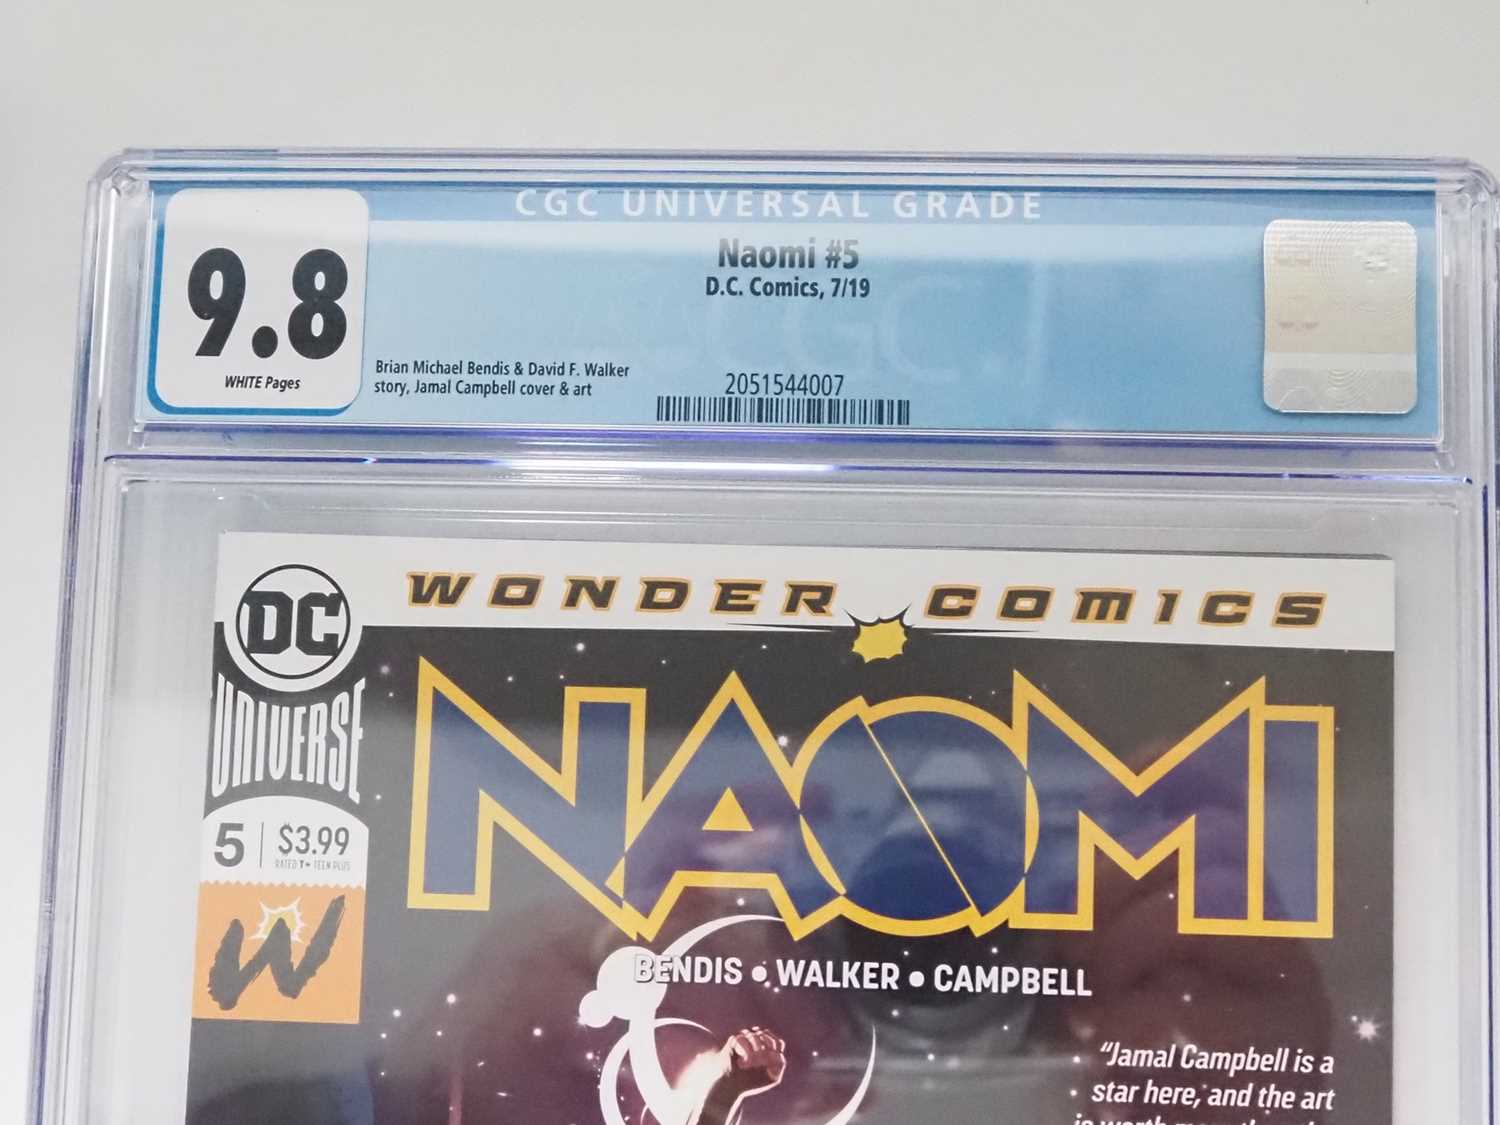 NAOMI #1, 2, 3, 4, 5 (5 in Lot) - (2019 - DC) - ALL GRADED 9.8 (NM/MINT) by CGC - First - Image 7 of 7